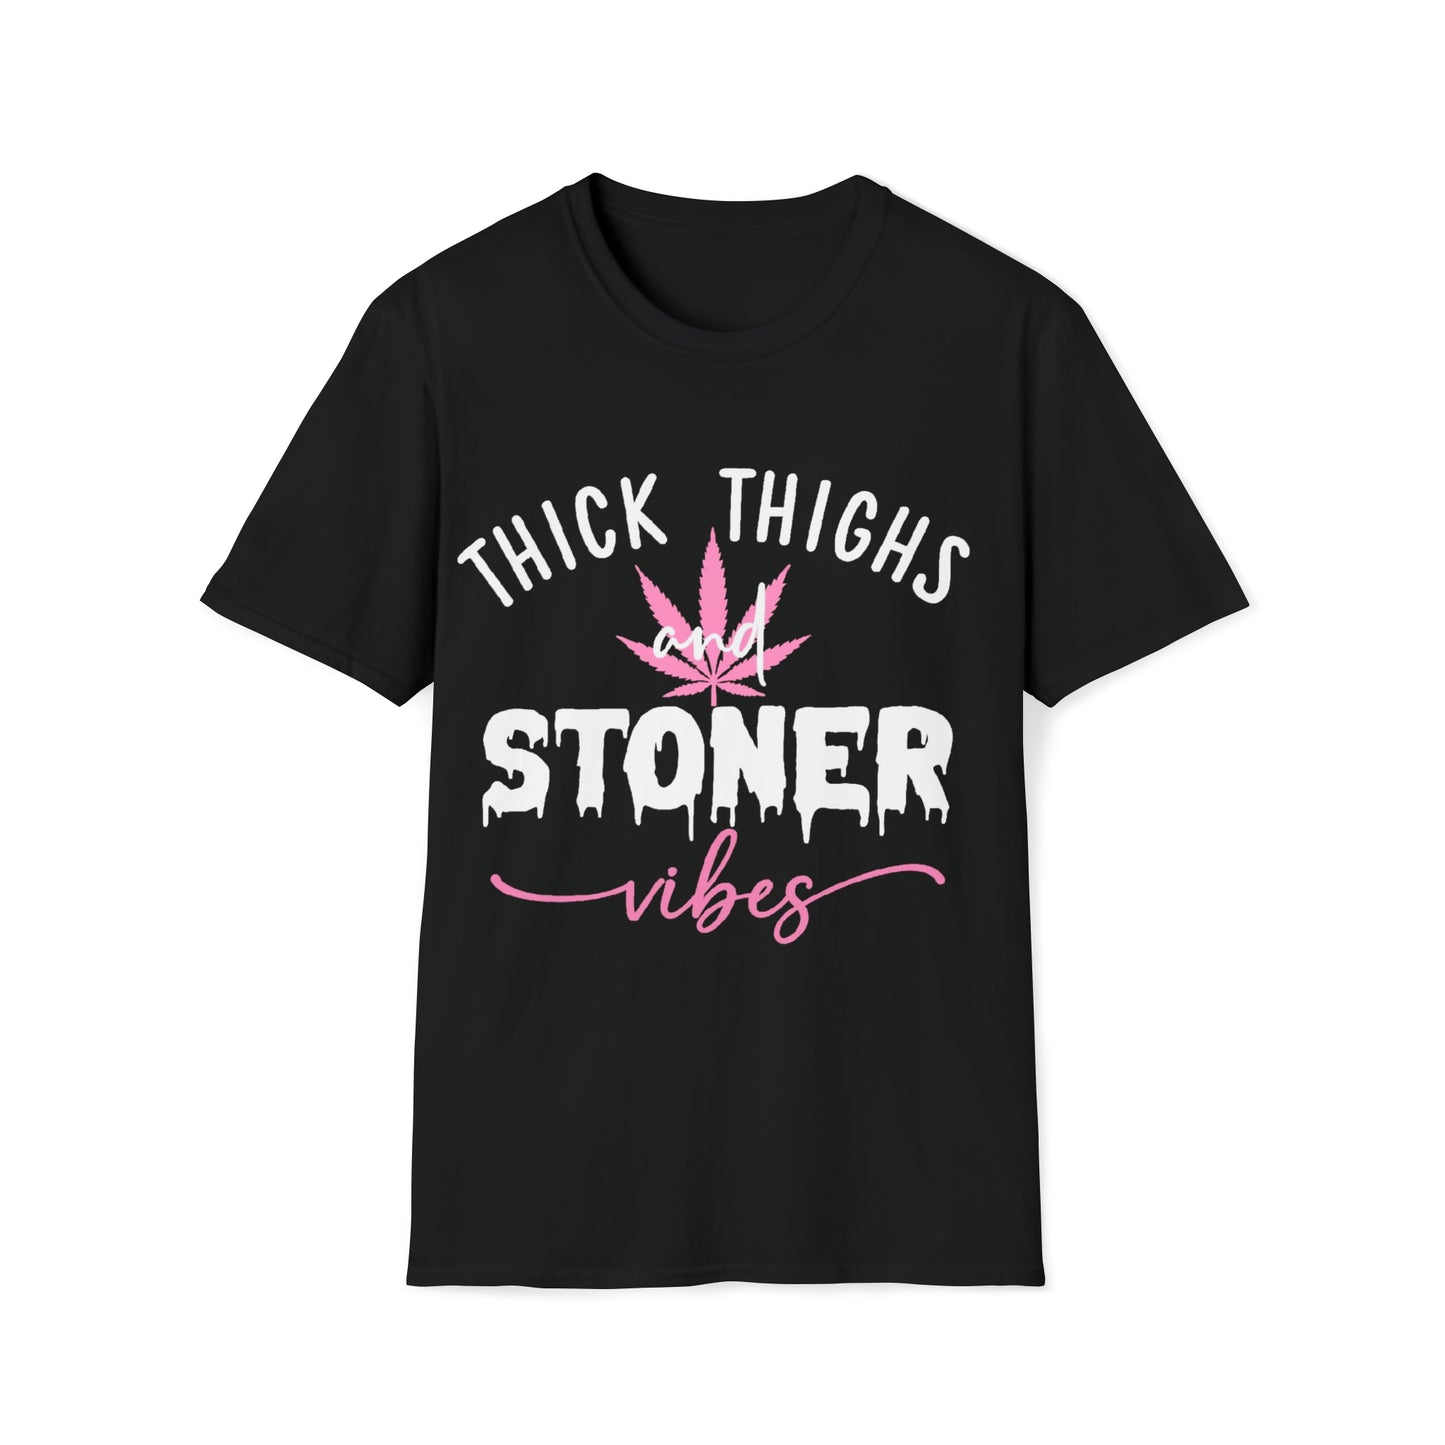 Thick thighs stoner vibes tee